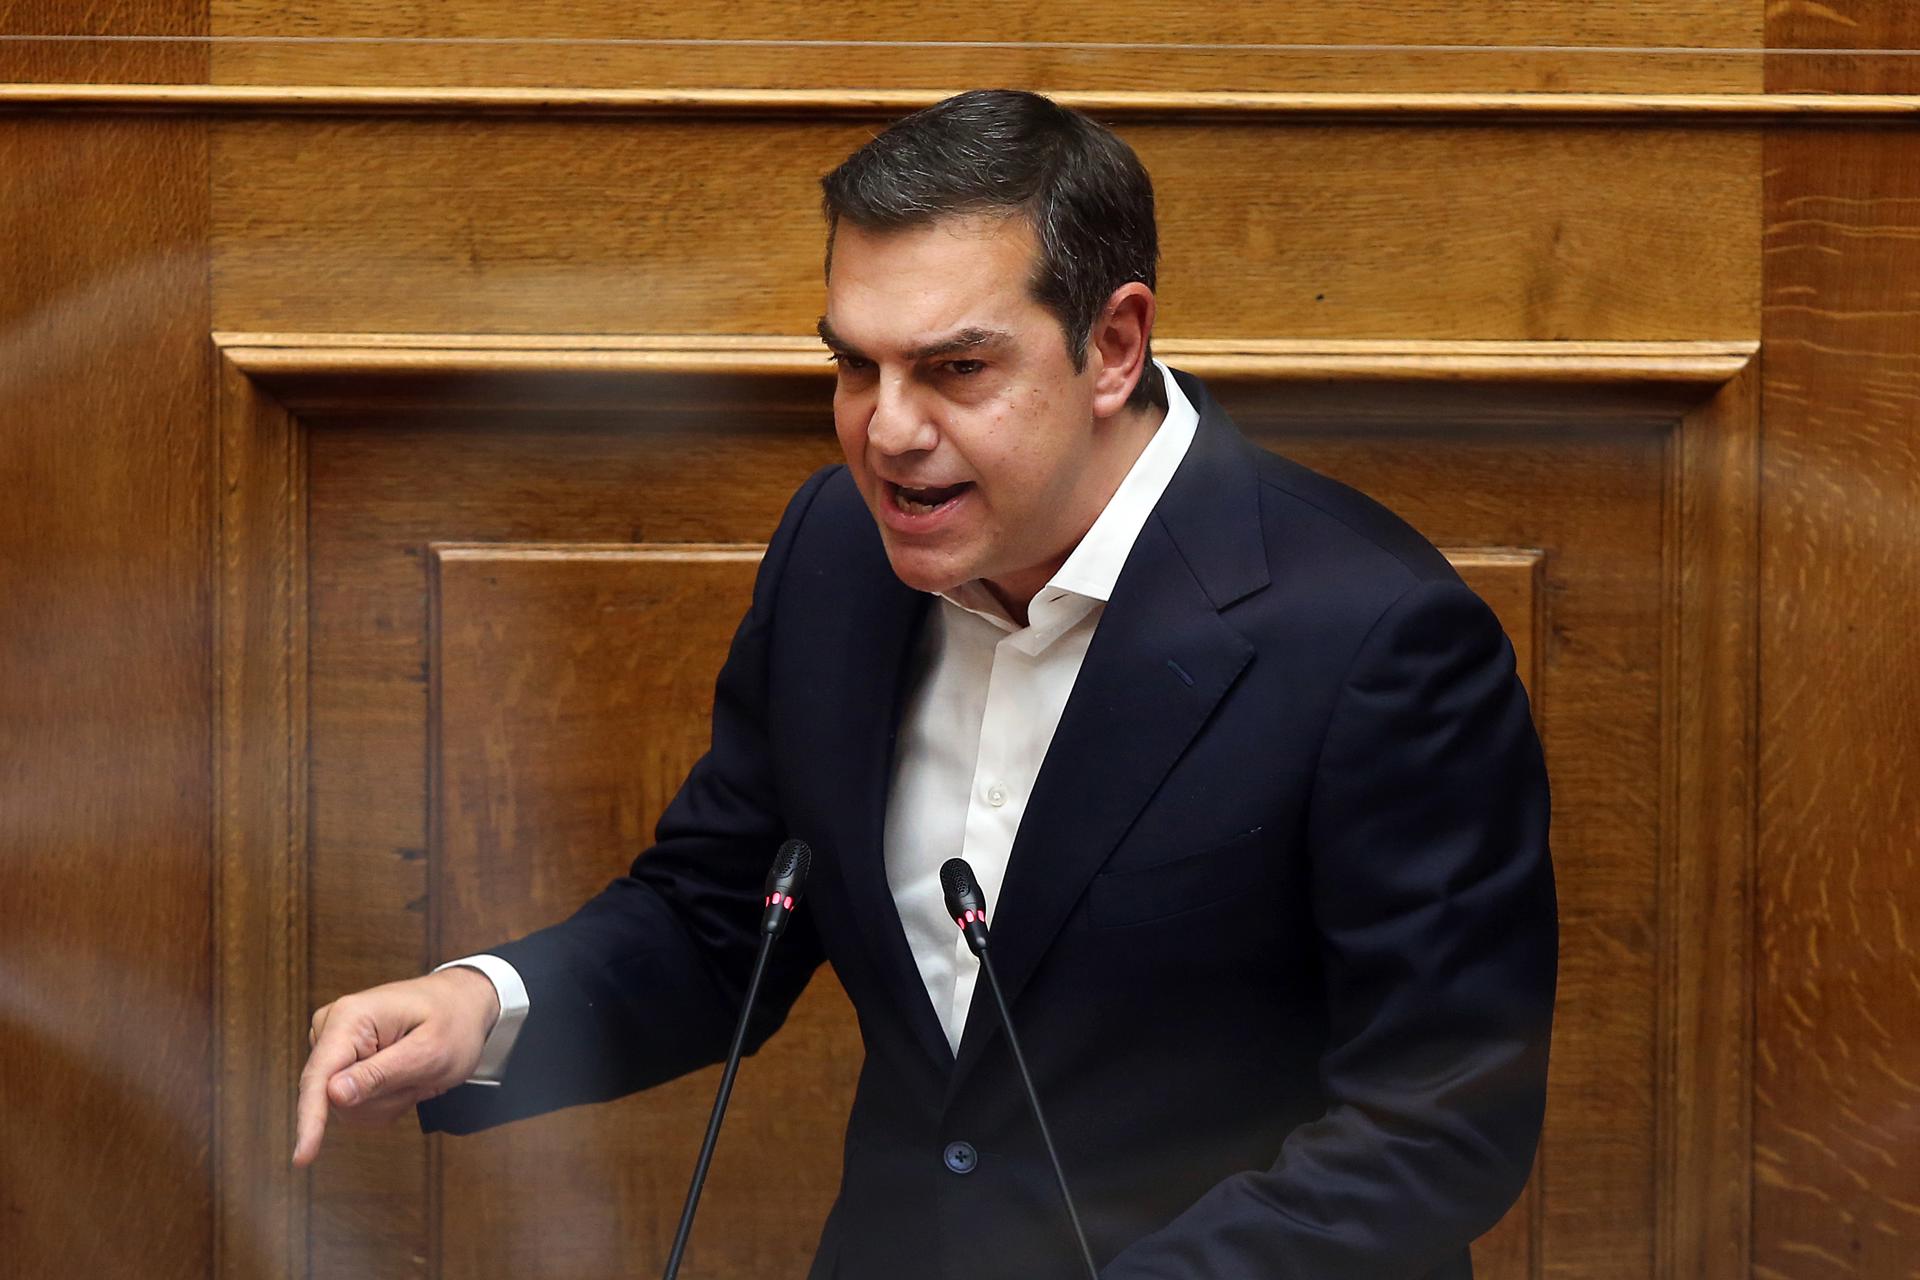 File image of former Prime Minister of Greece Alexis Tsipras, leader of the opposition and leftist Syriza.  BLAZETRENDS/EPA/ORESTIS PANAGIOTOU